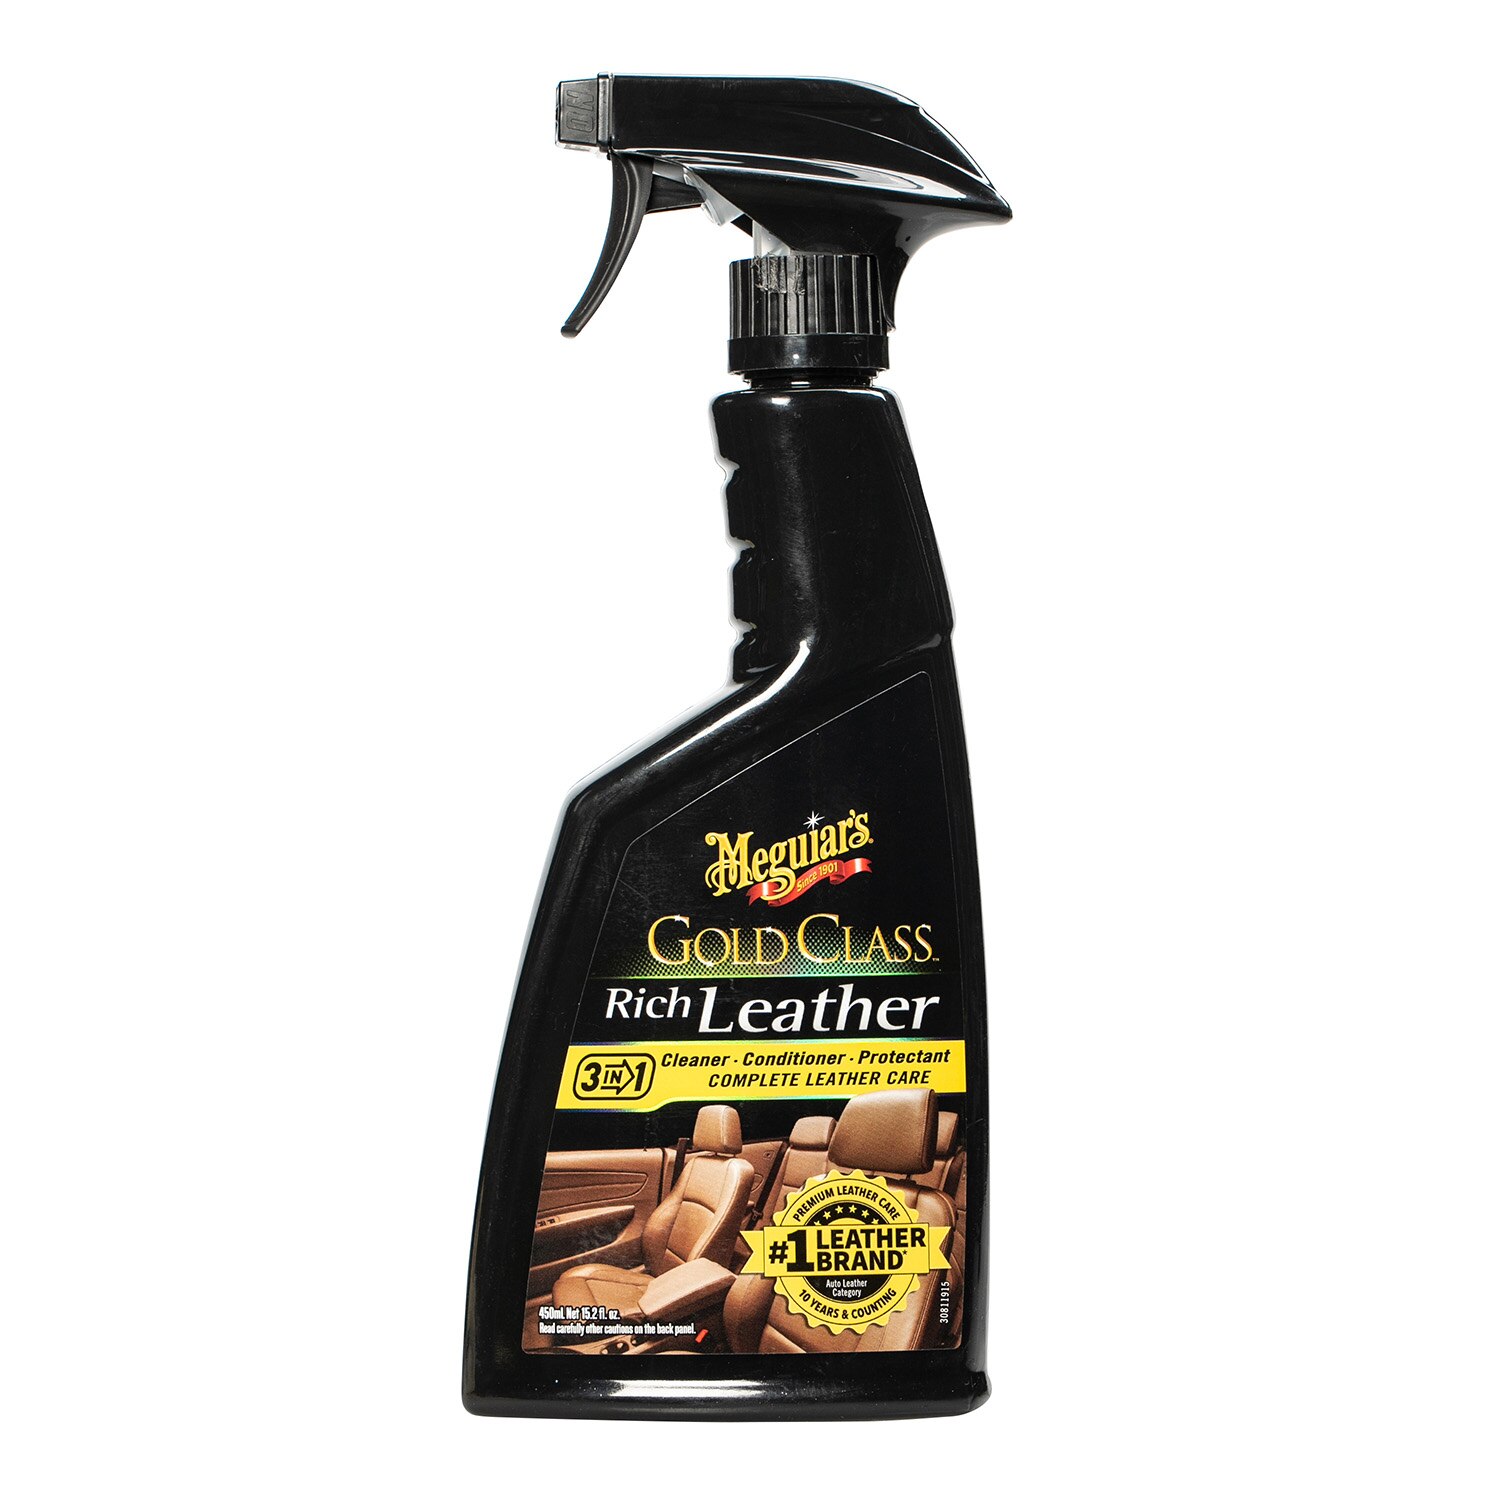 Meguiar's Gold Class Rich Leather Cleaner, Conditioner & Protectant, 15.2 OZ